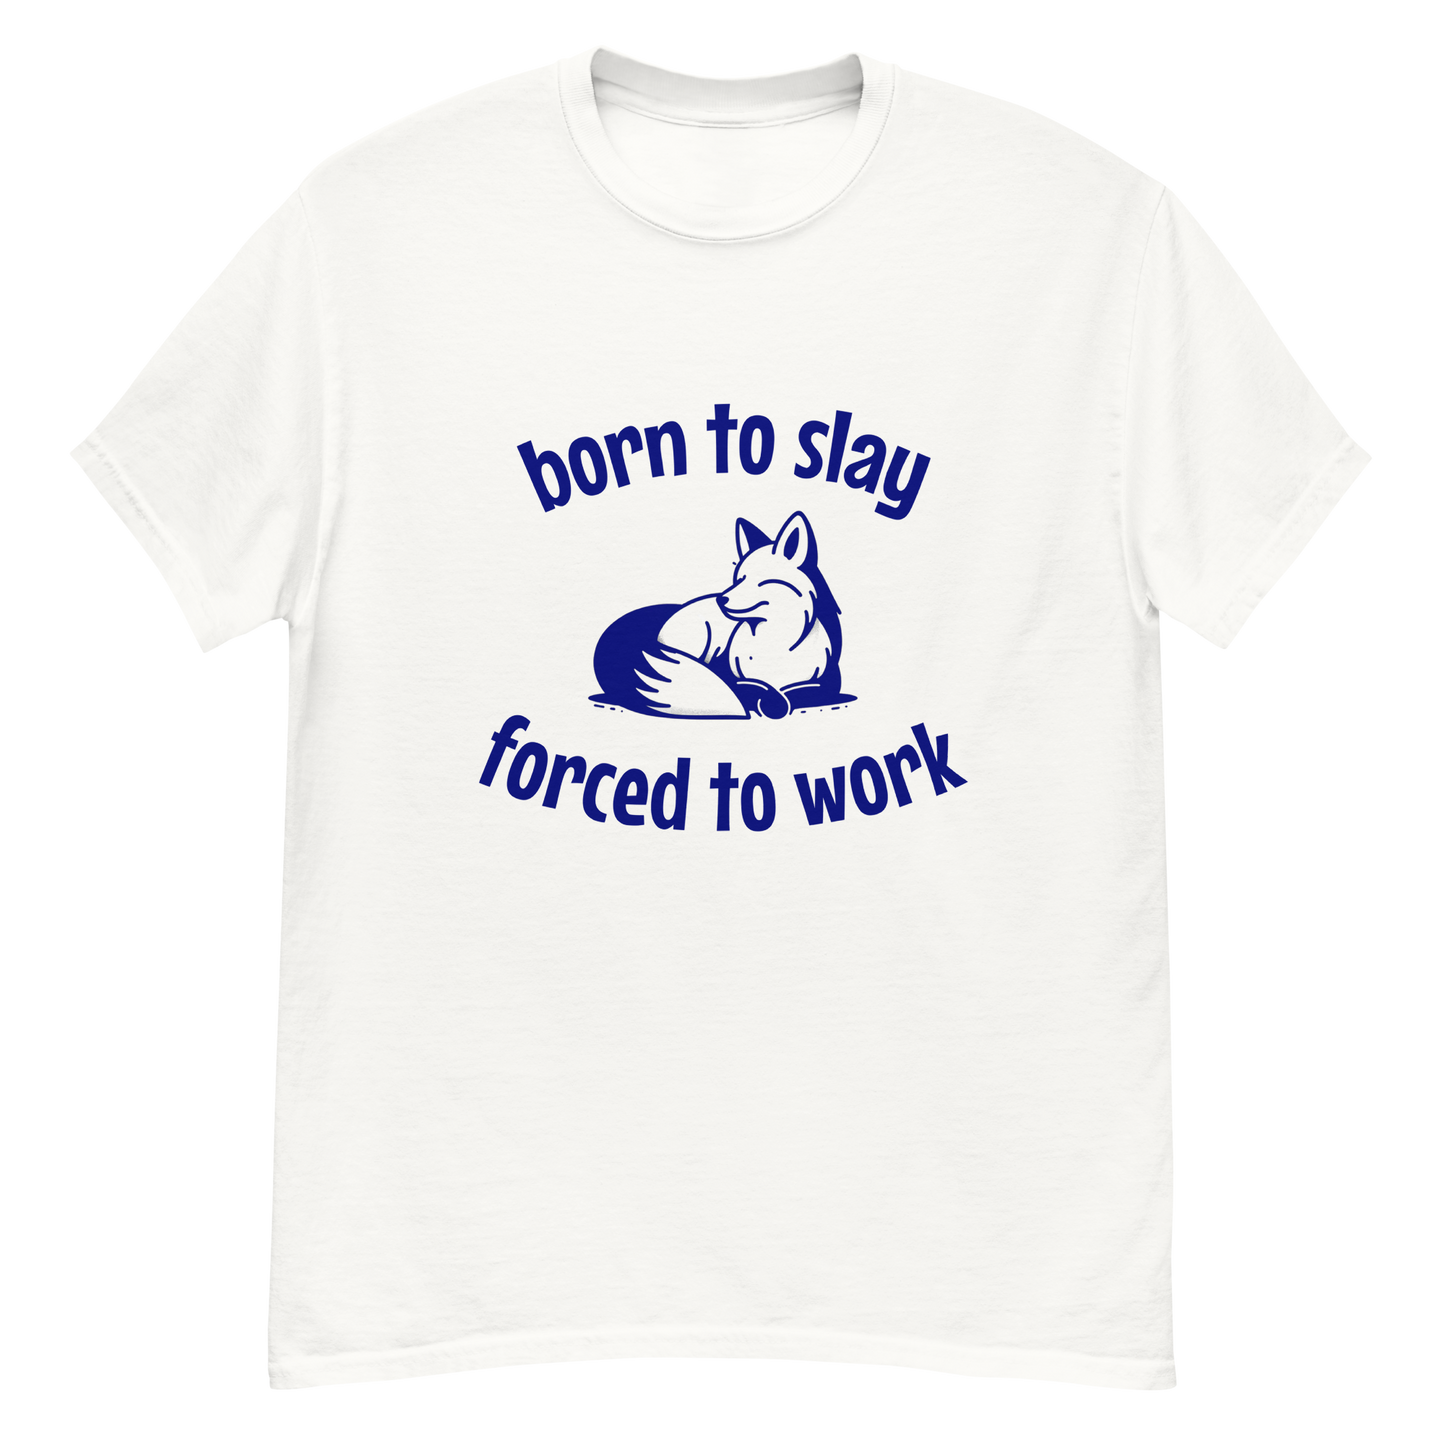 Born to slay forced to work